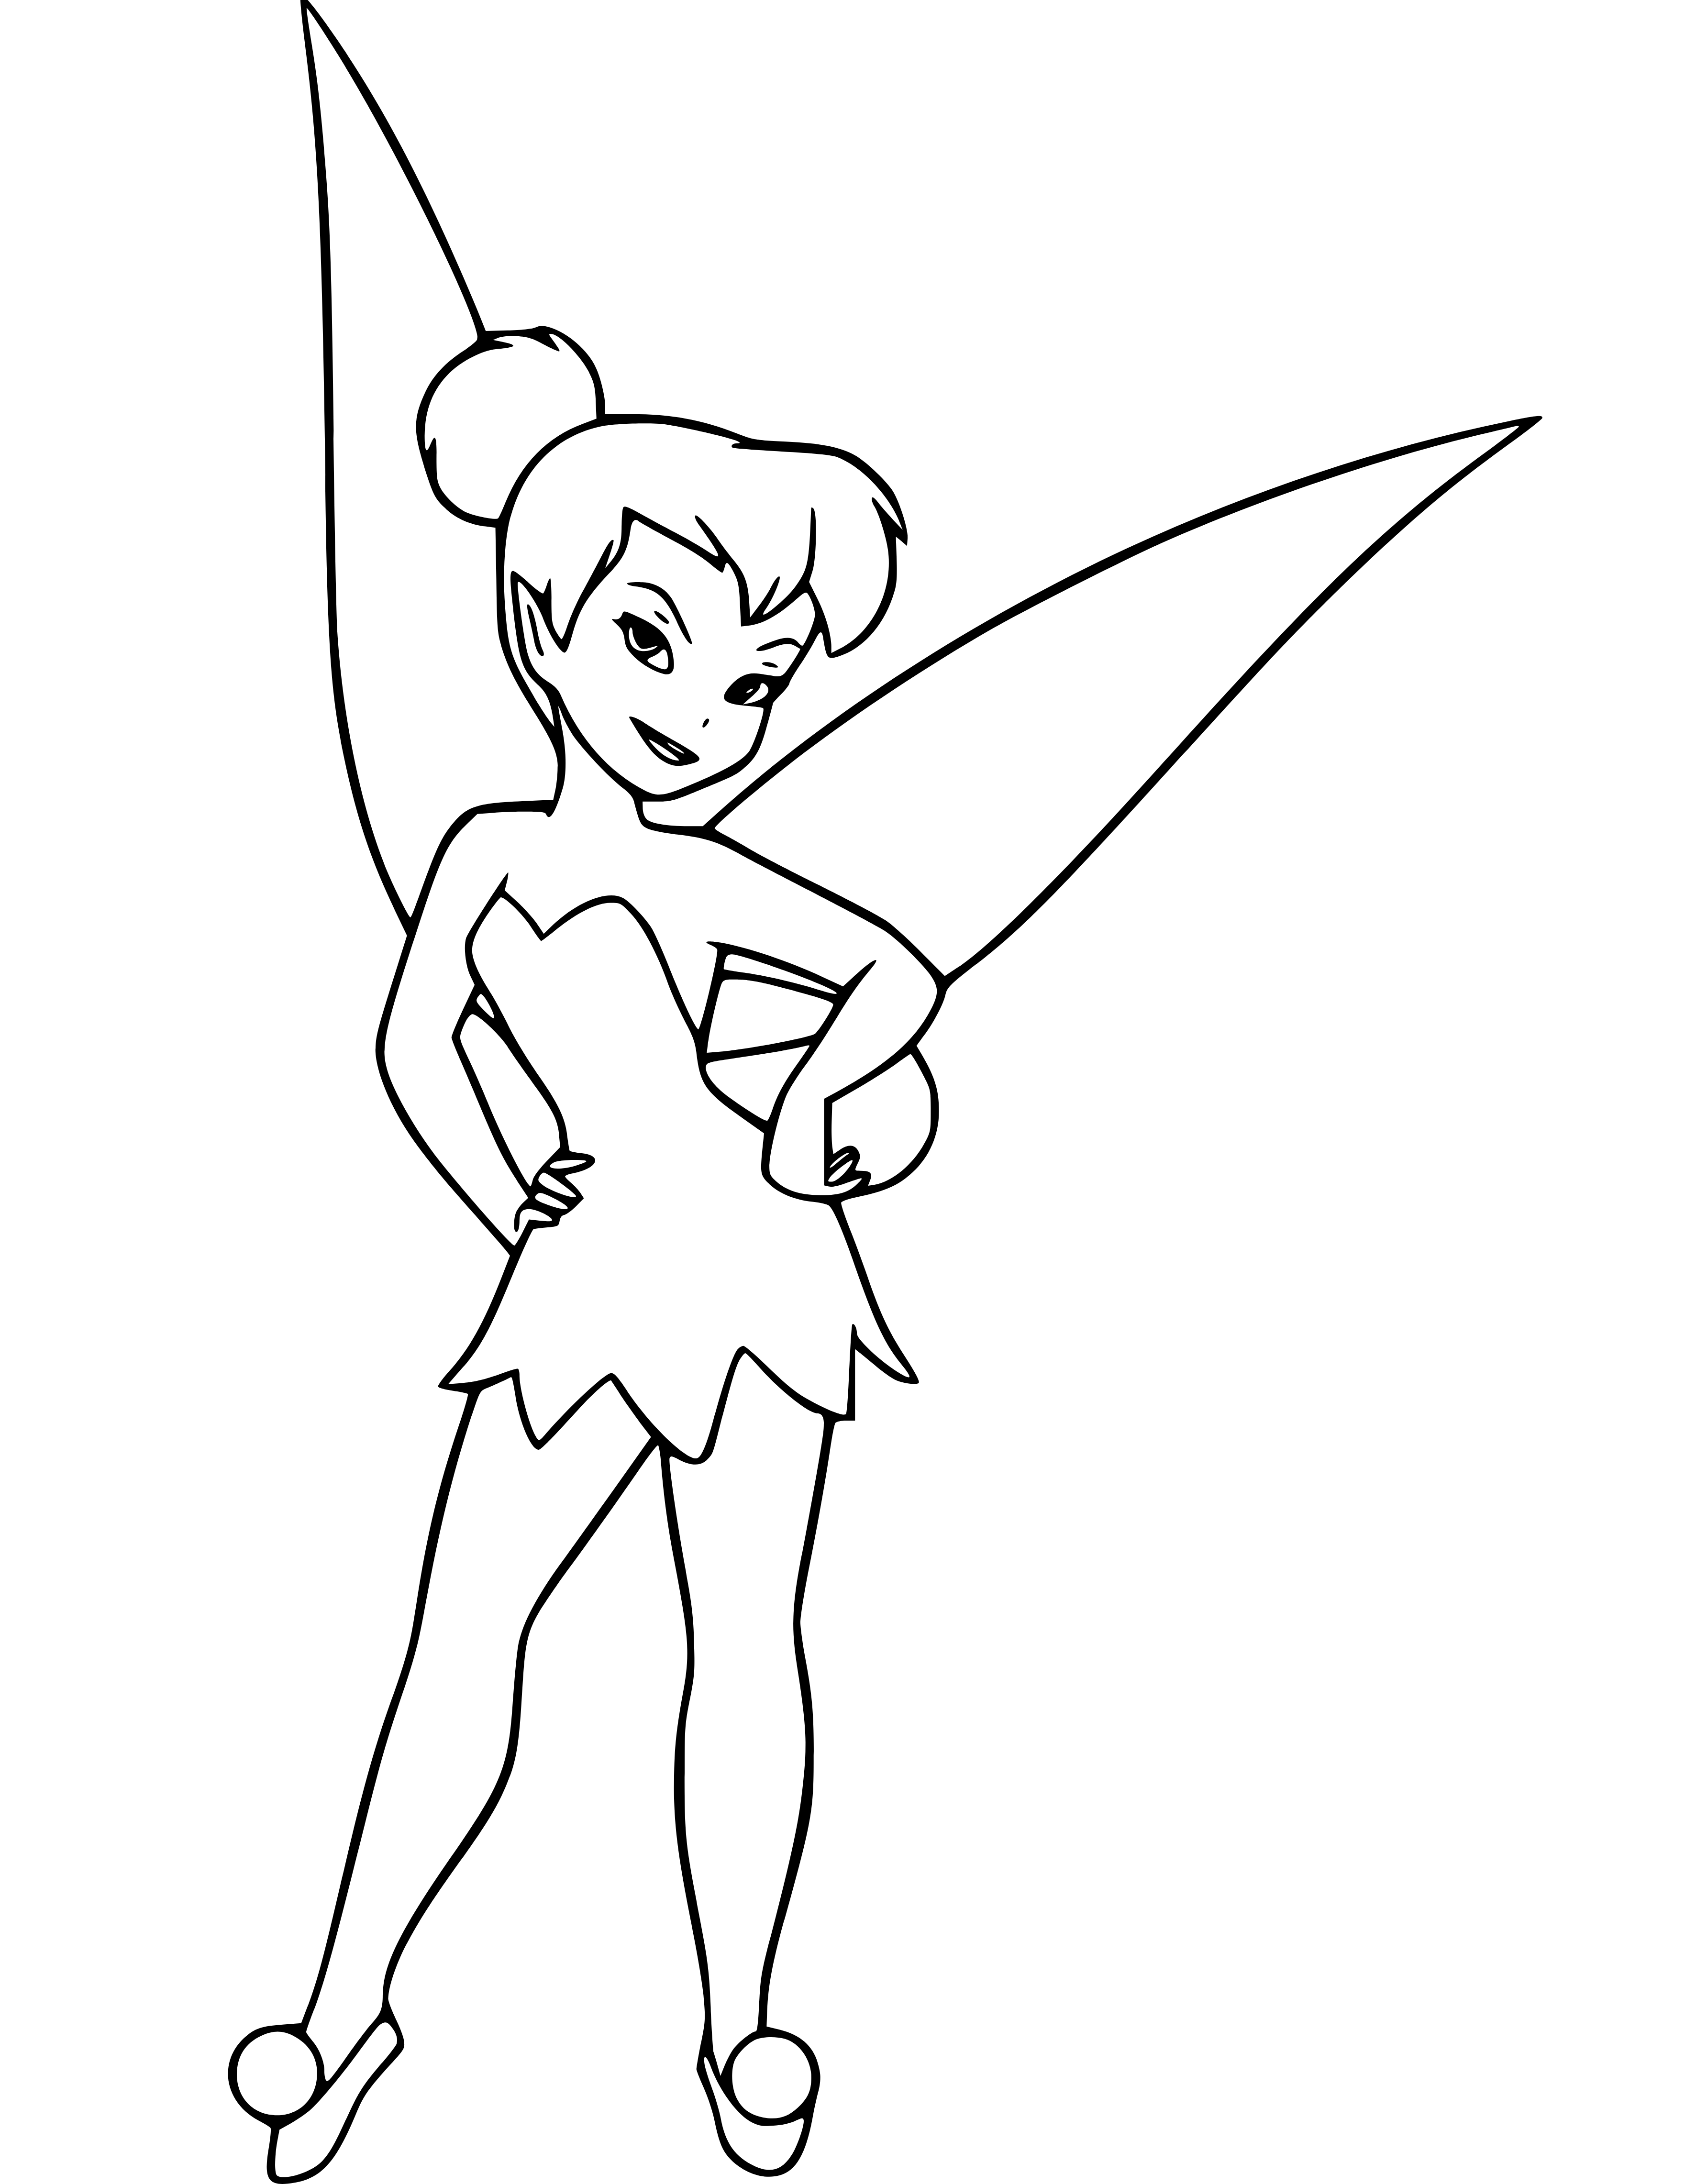 Tinker Bell painting to color - SheetalColor.com